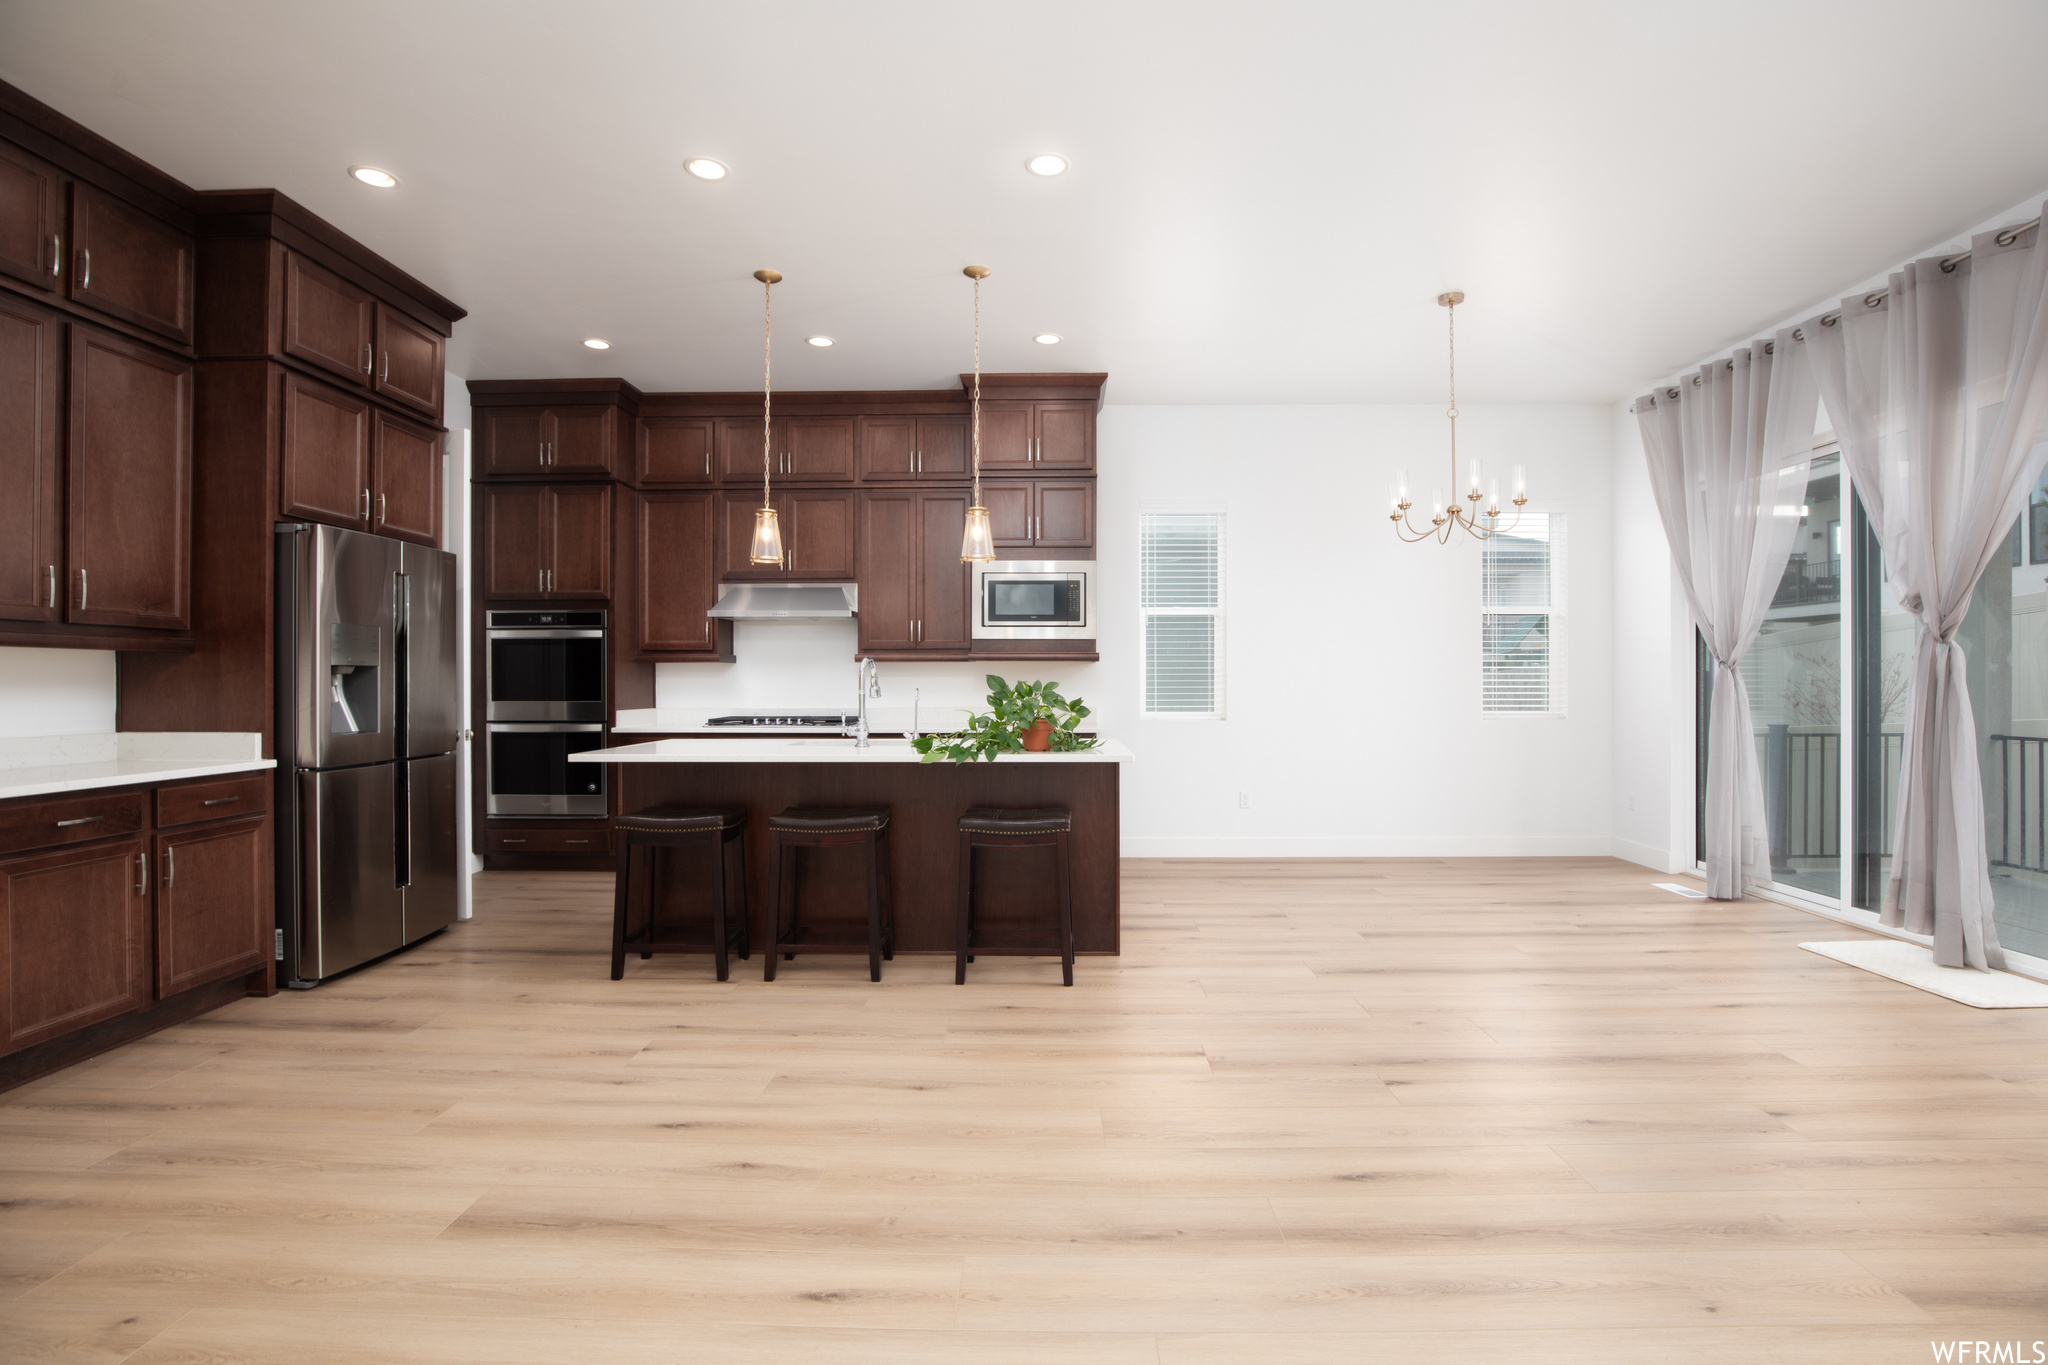 Kitchen with a wealth of natural light, light wood-type flooring, and appliances with stainless steel finishes